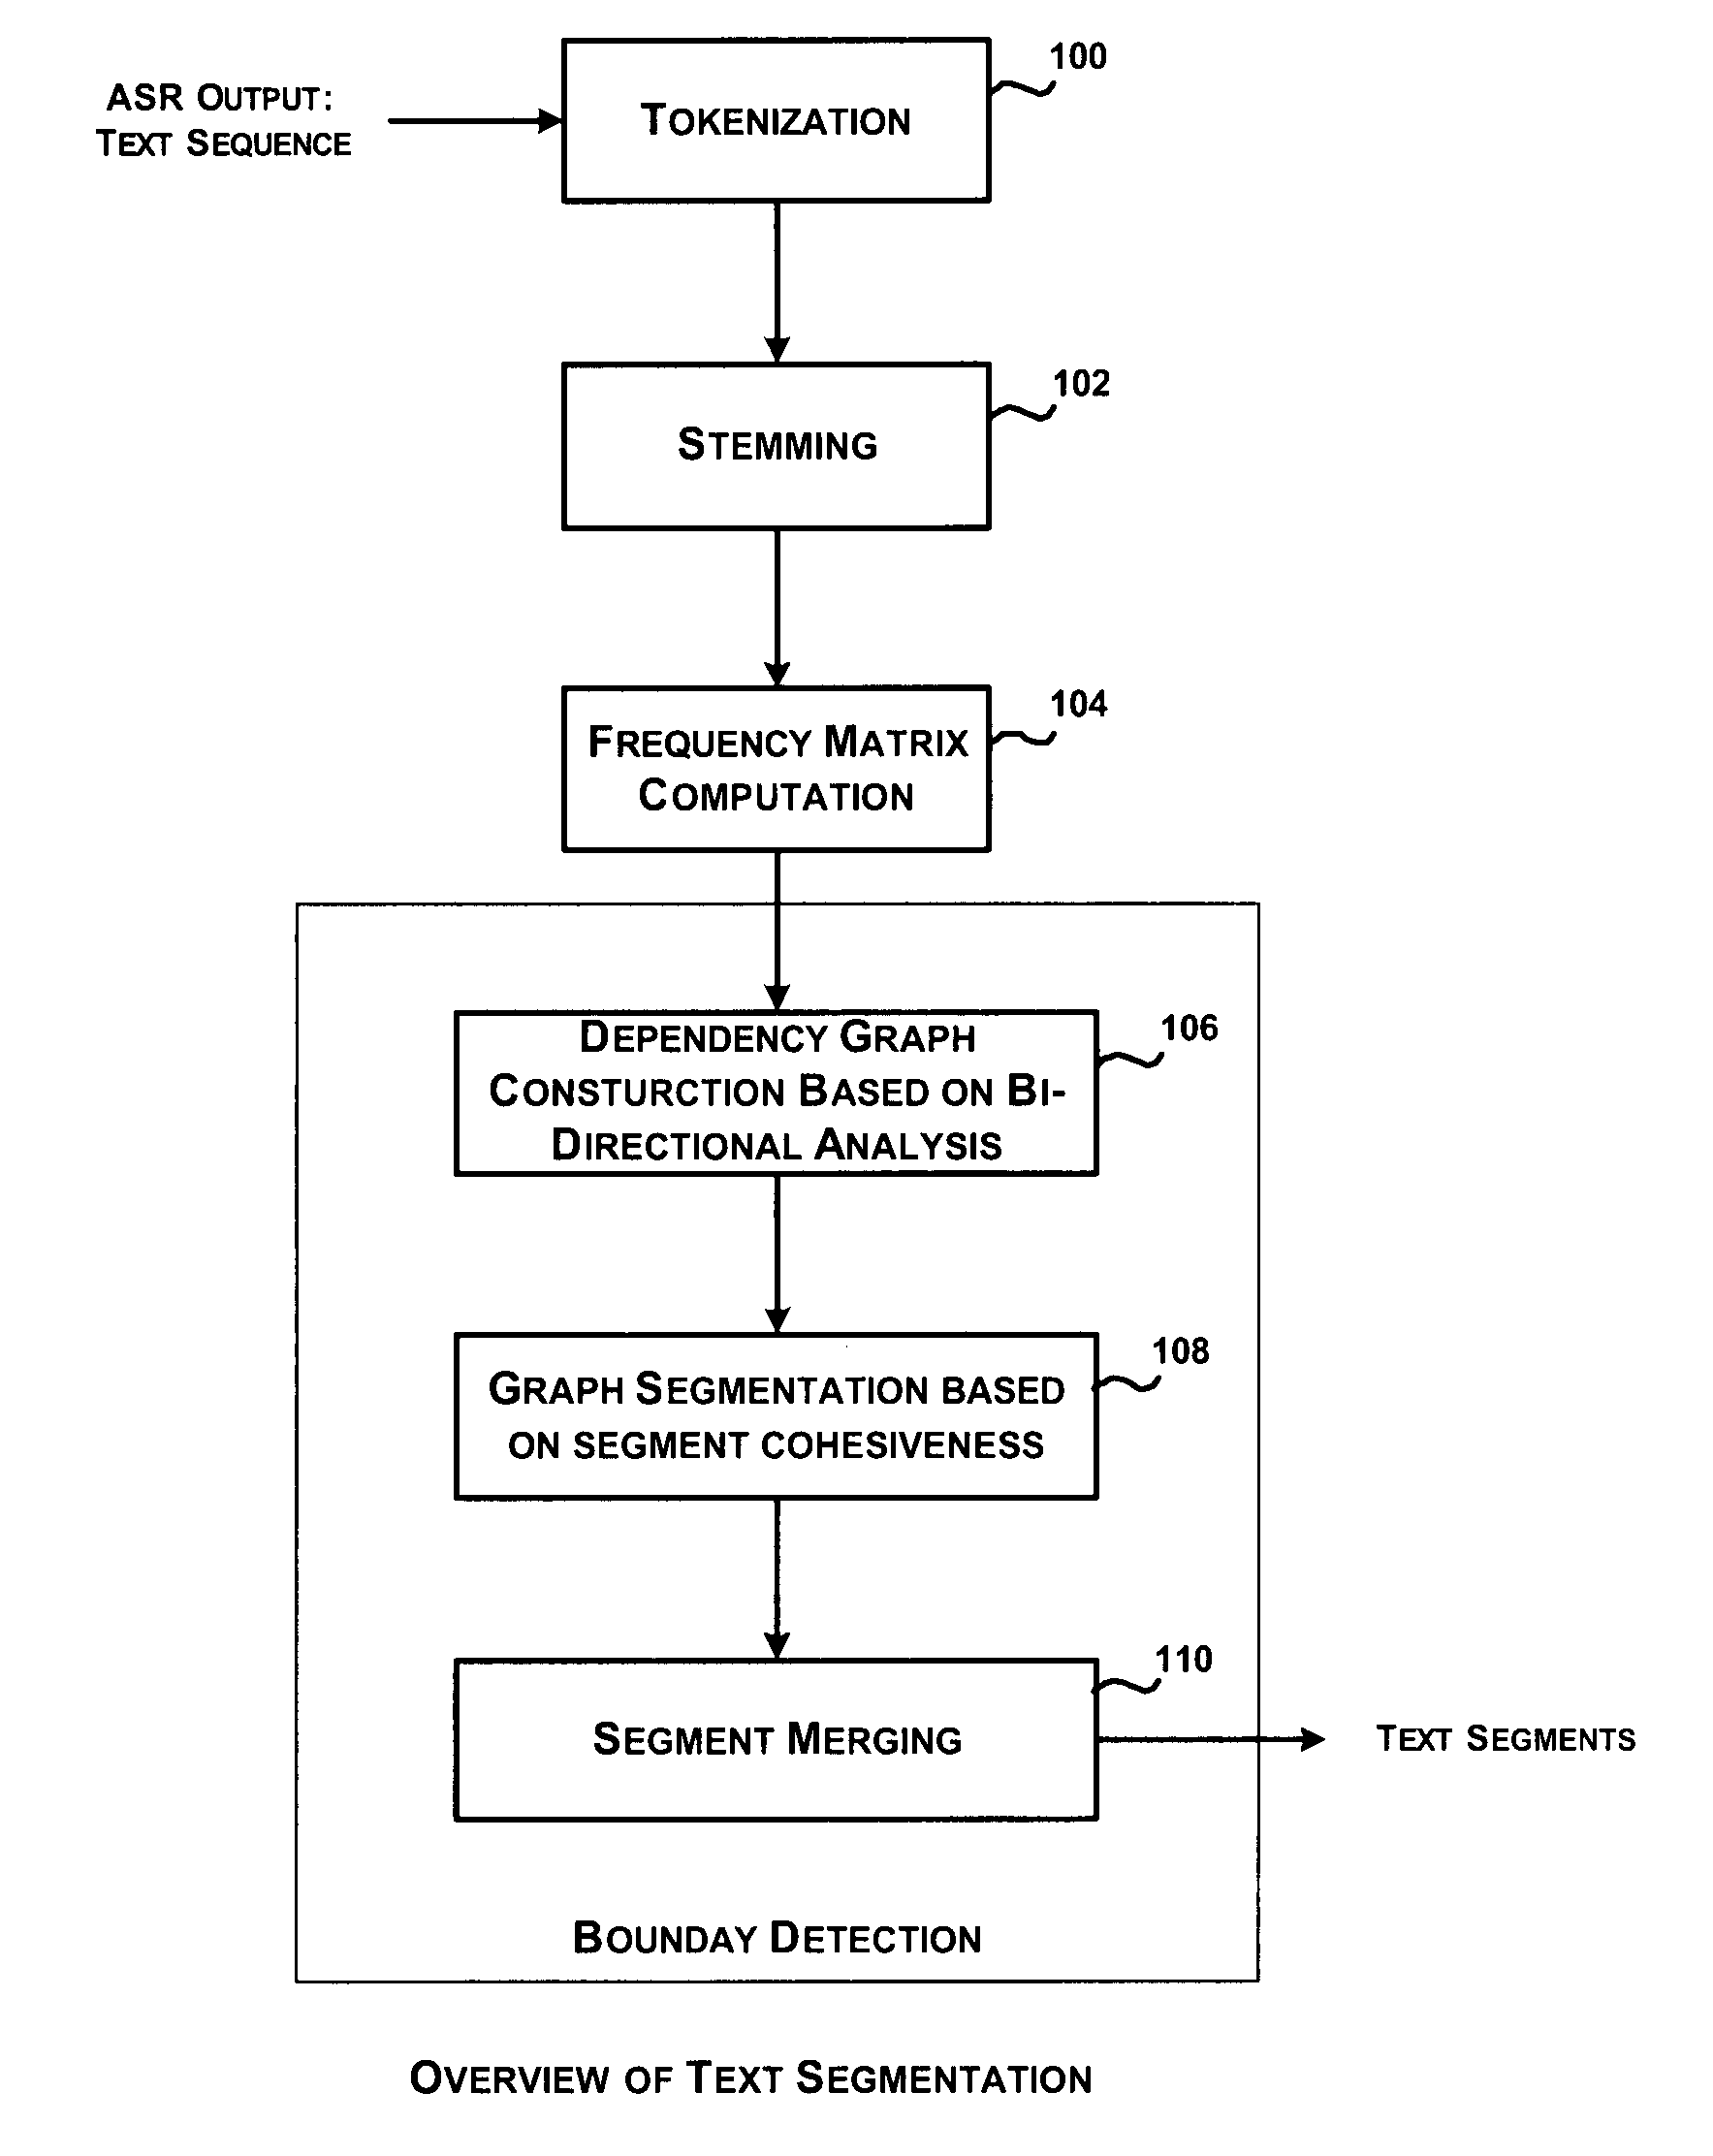 System and method for automatic segmentation of ASR transcripts